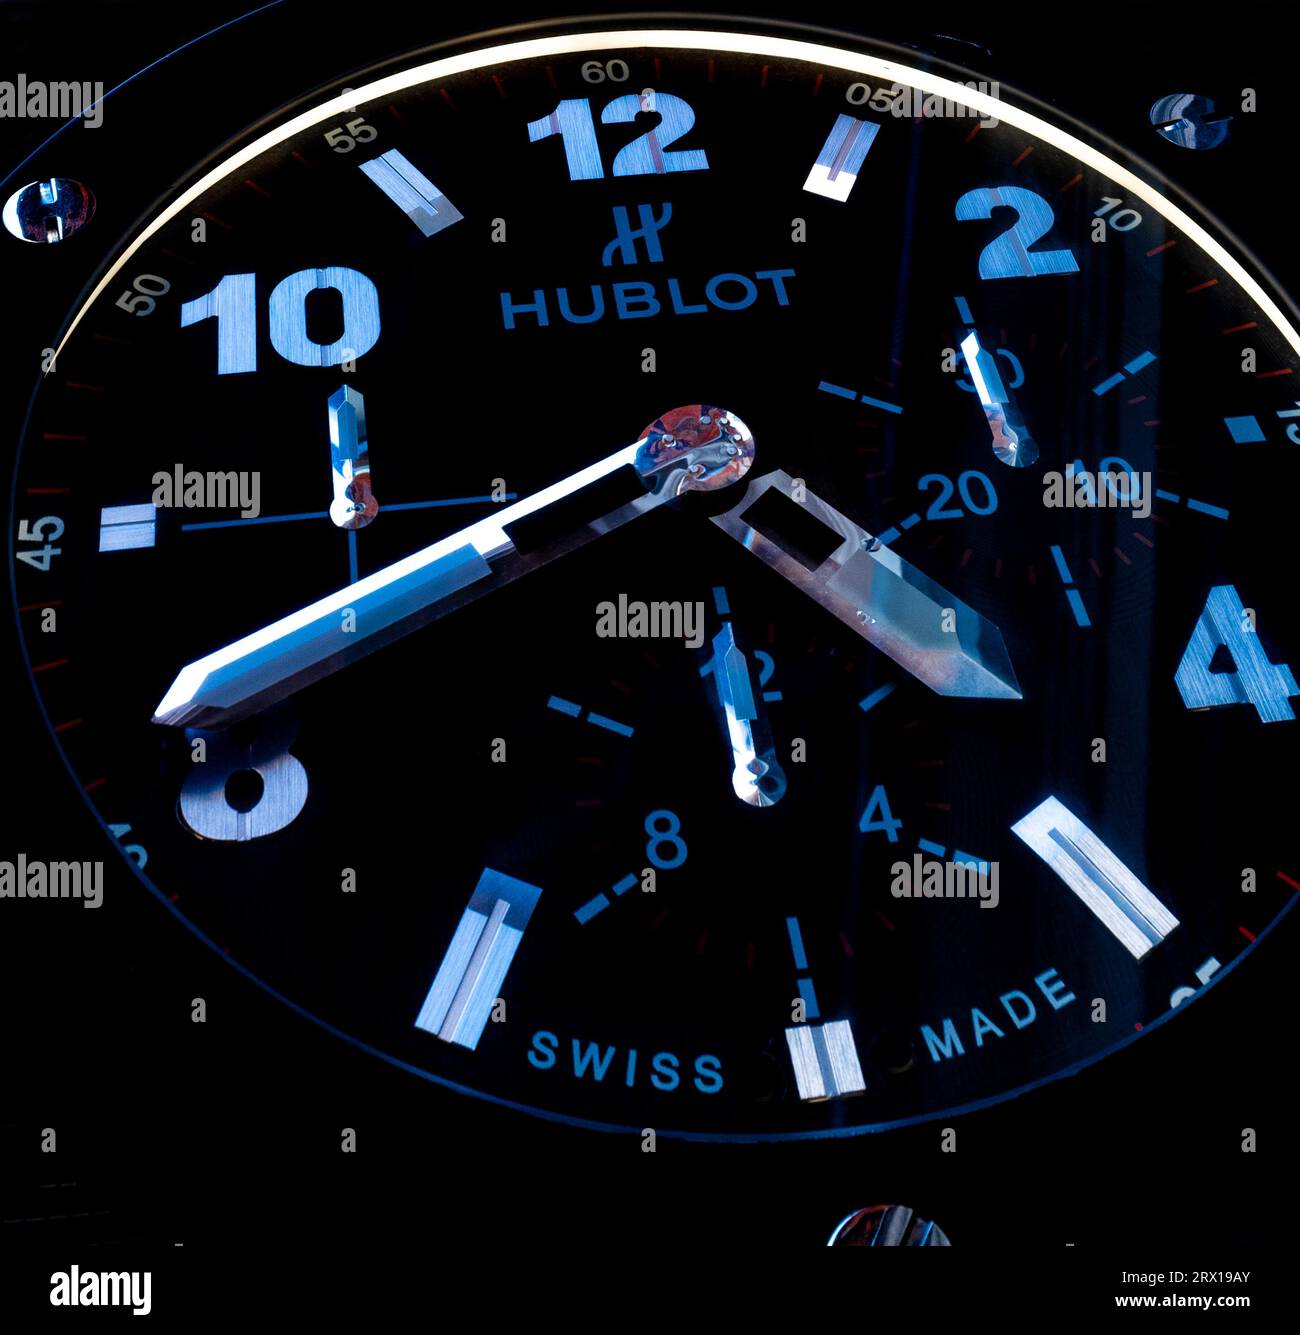 Hublot wristwatch face, an upmarket brand of Swiss watch, the company wholly owned by LVMH Stock Photo